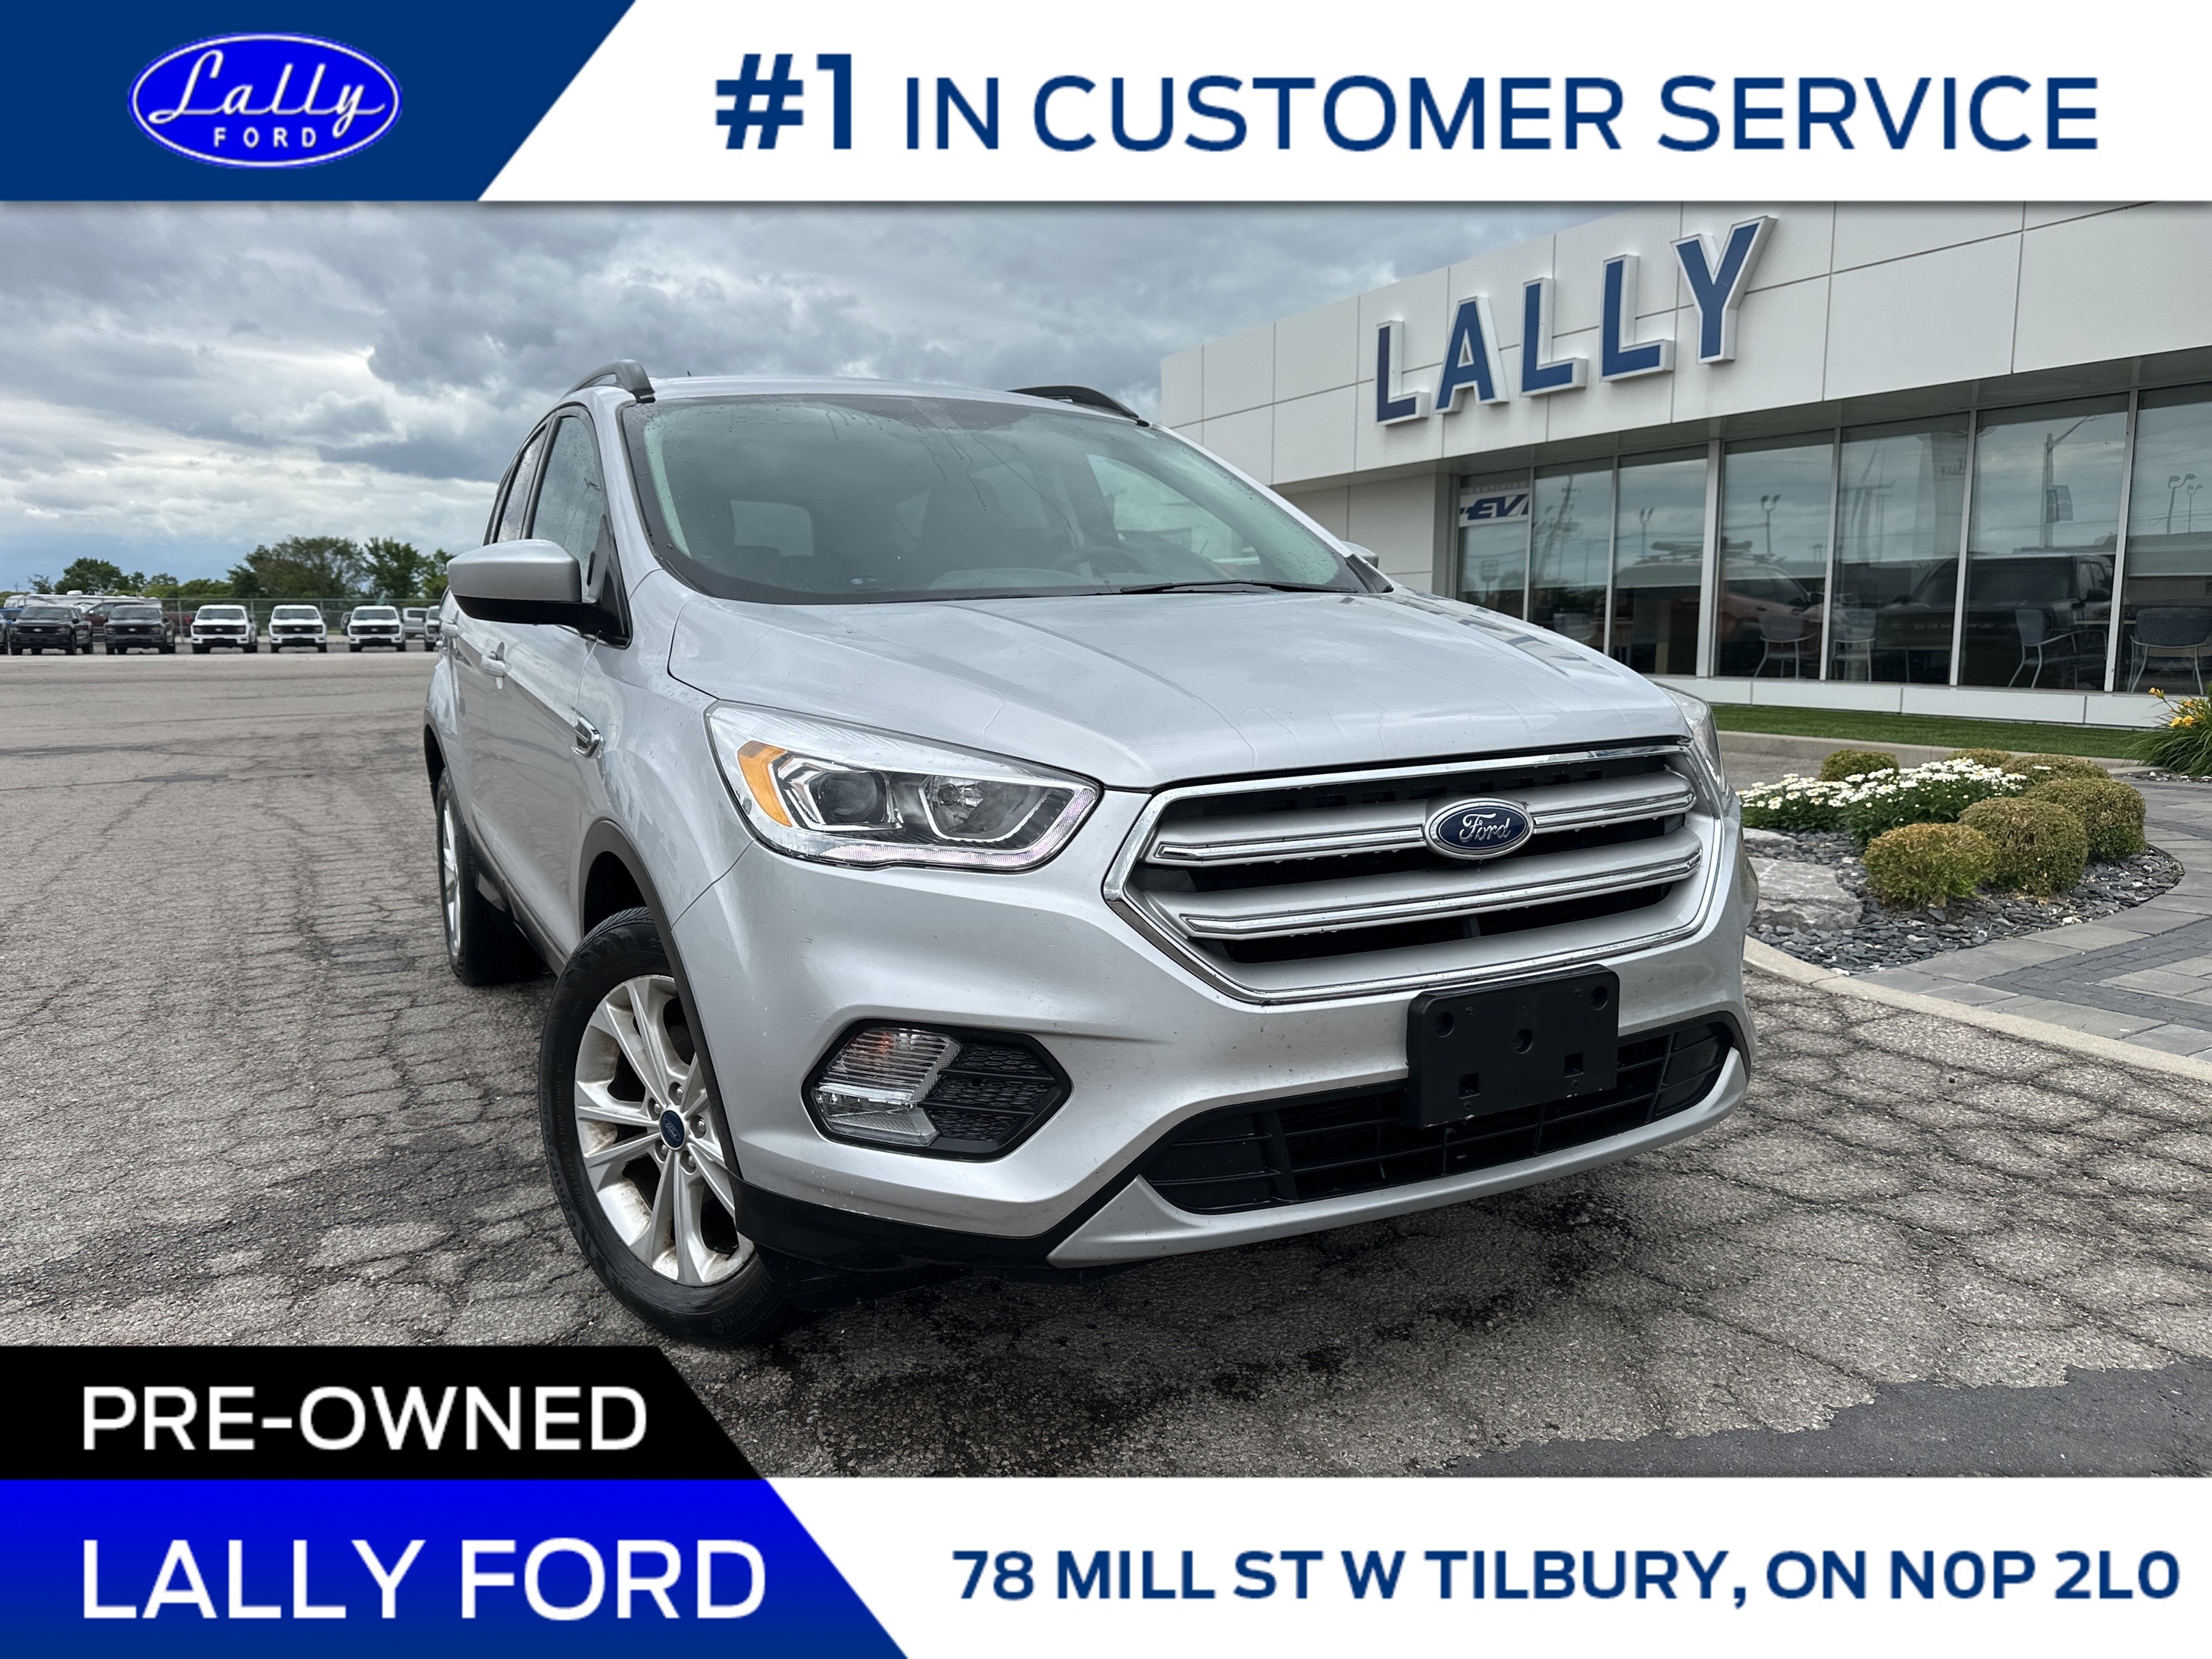 2019 Ford Escape SEL, AWD, Nav, Leather!